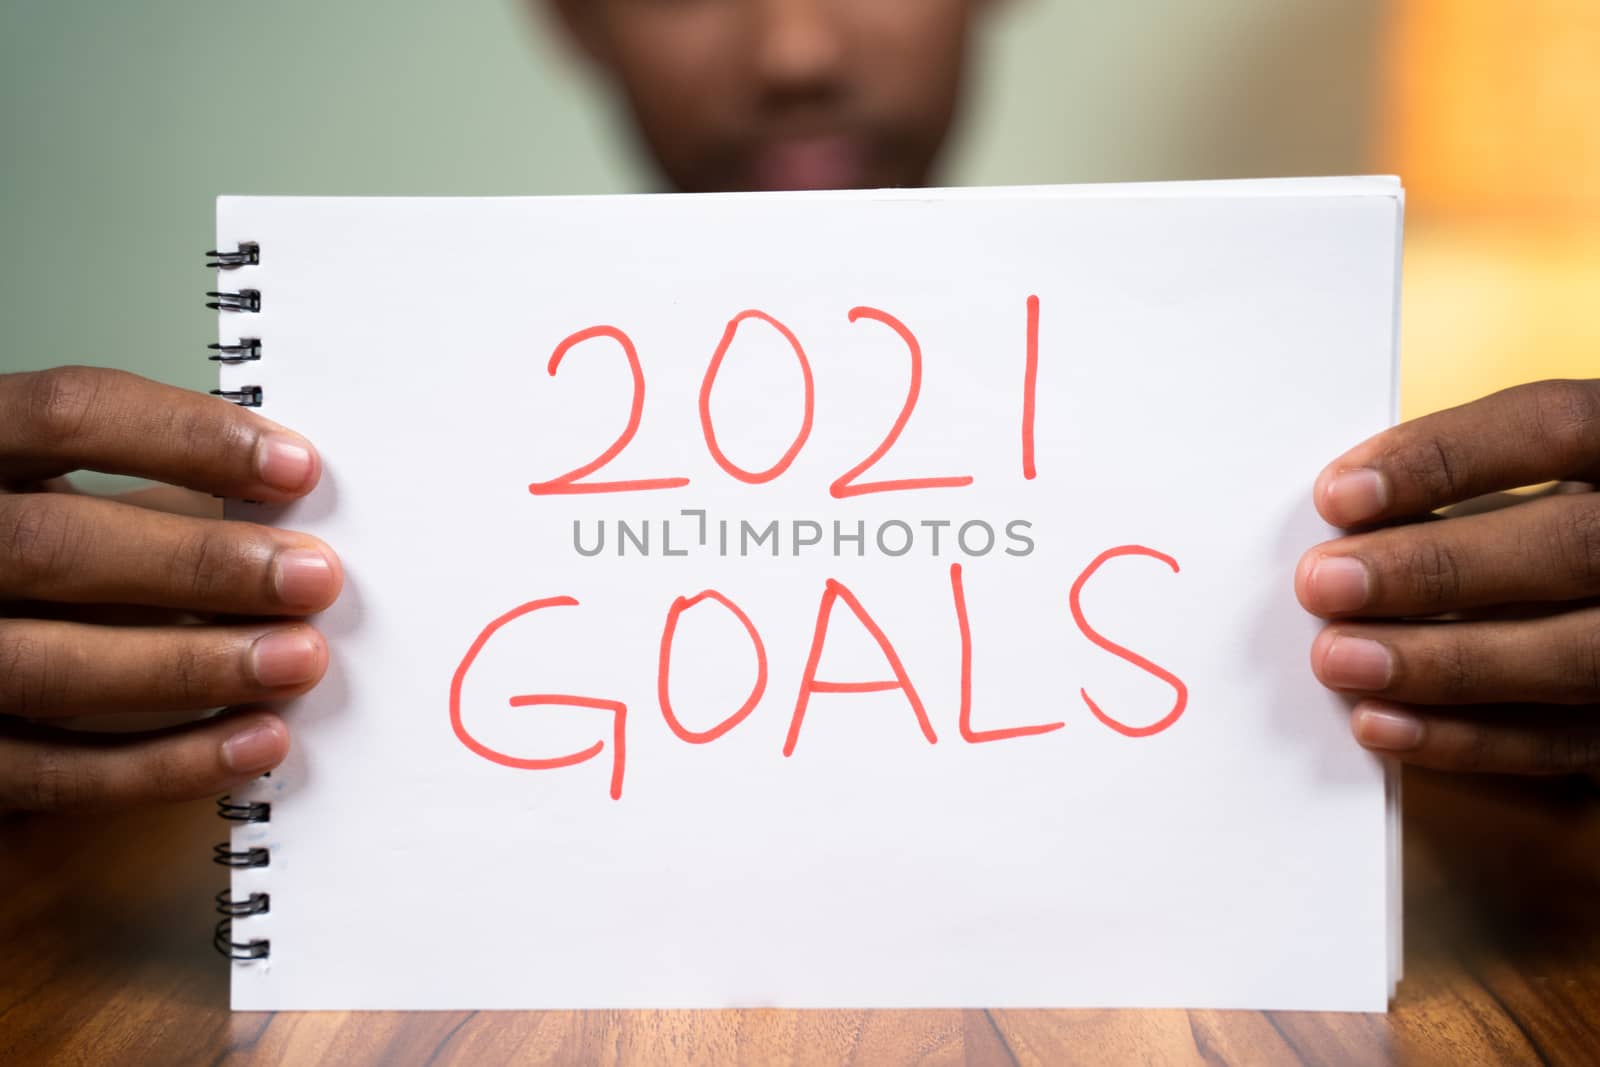 Man on table holding 2021 goals book in front of camera - concept of planning 2021 new year goals